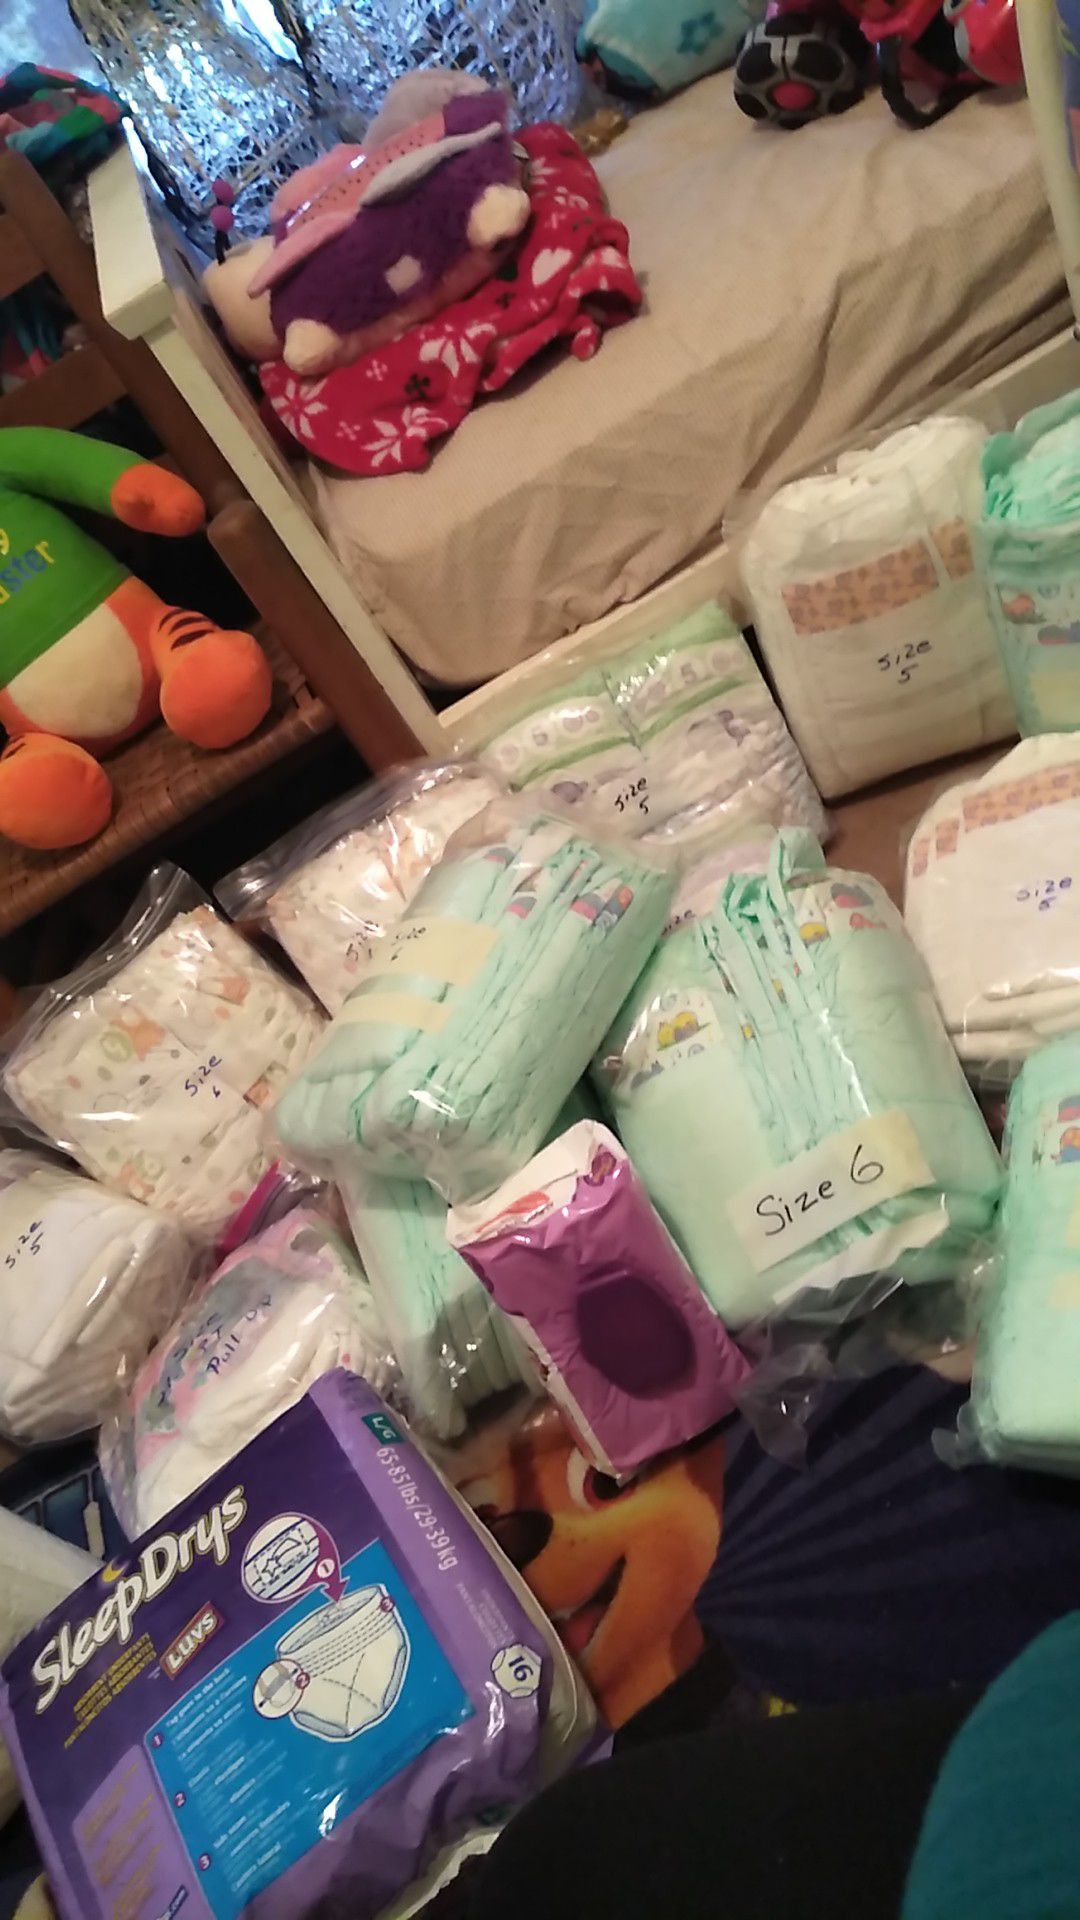 Dippers and wipes for sale got Huggies and luv and Pampers size fives ,six, 2t and some large up to 67pounds and wipes